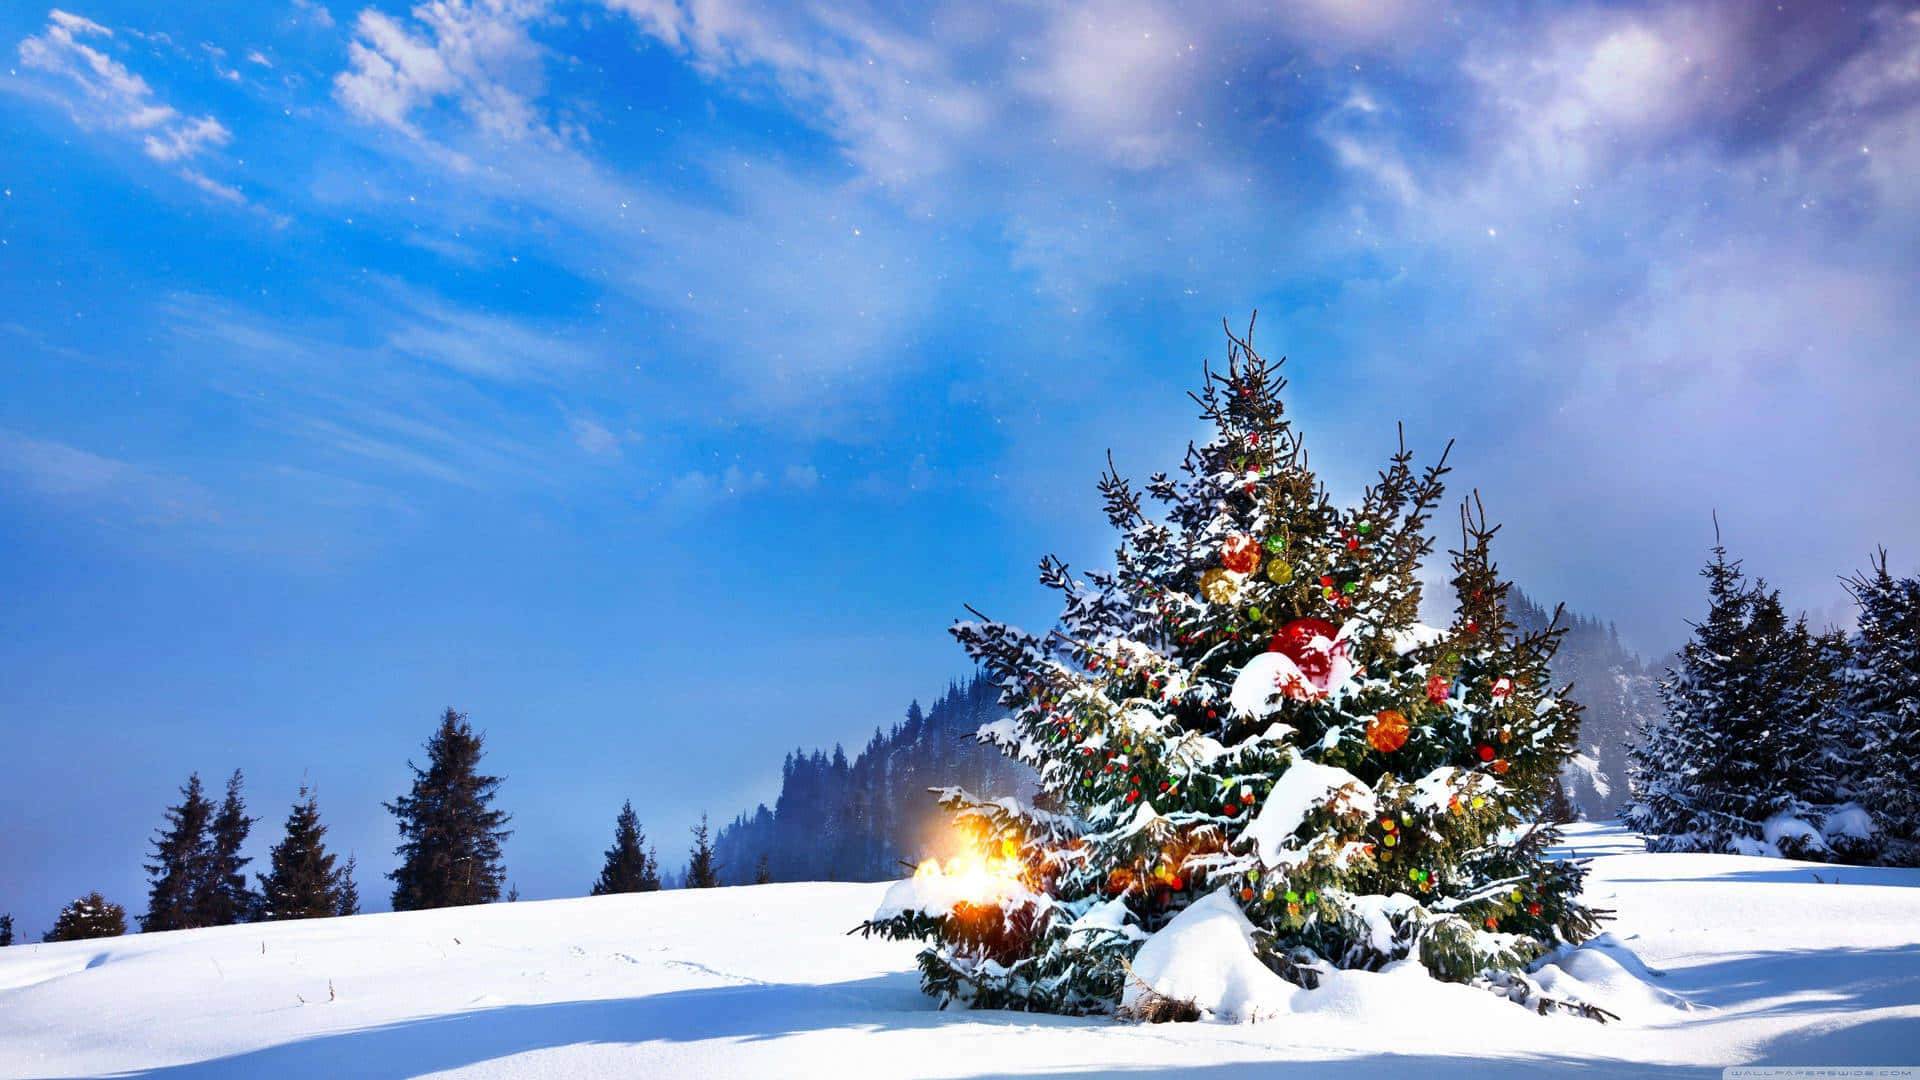 A magical winter night, perfect for celebrating the Christmas season. Wallpaper